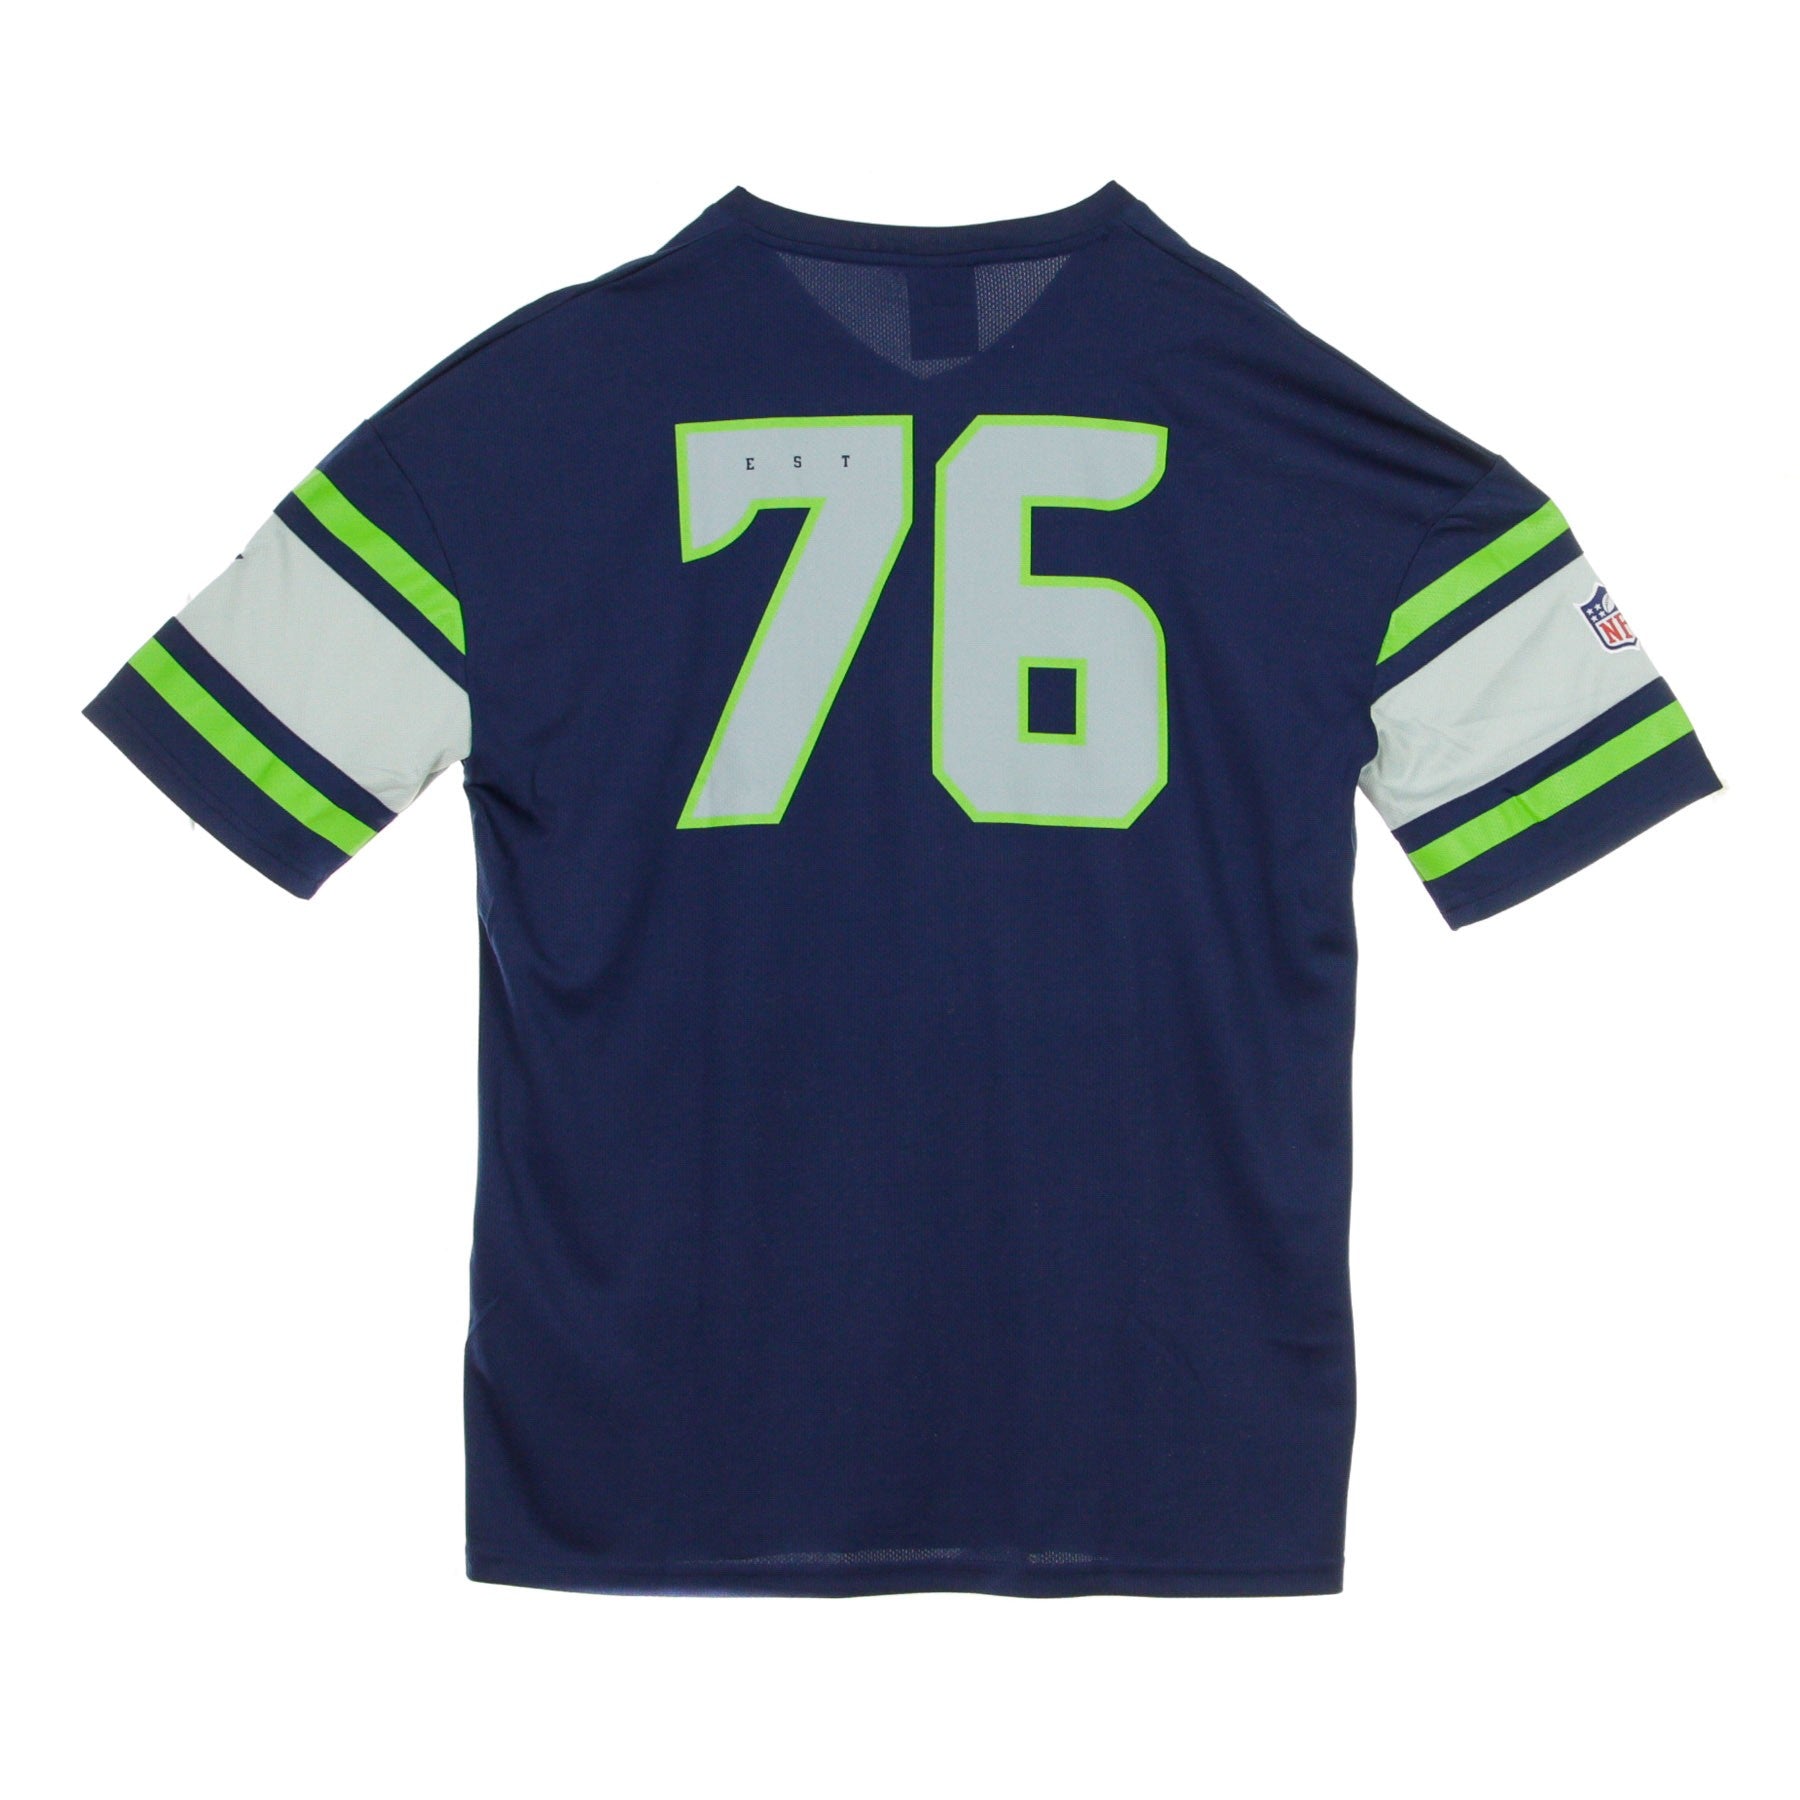 Casacca Uomo Nfl Iconic Franchise Poly Mesh Supporters Jersey Seasea Original Team Colors